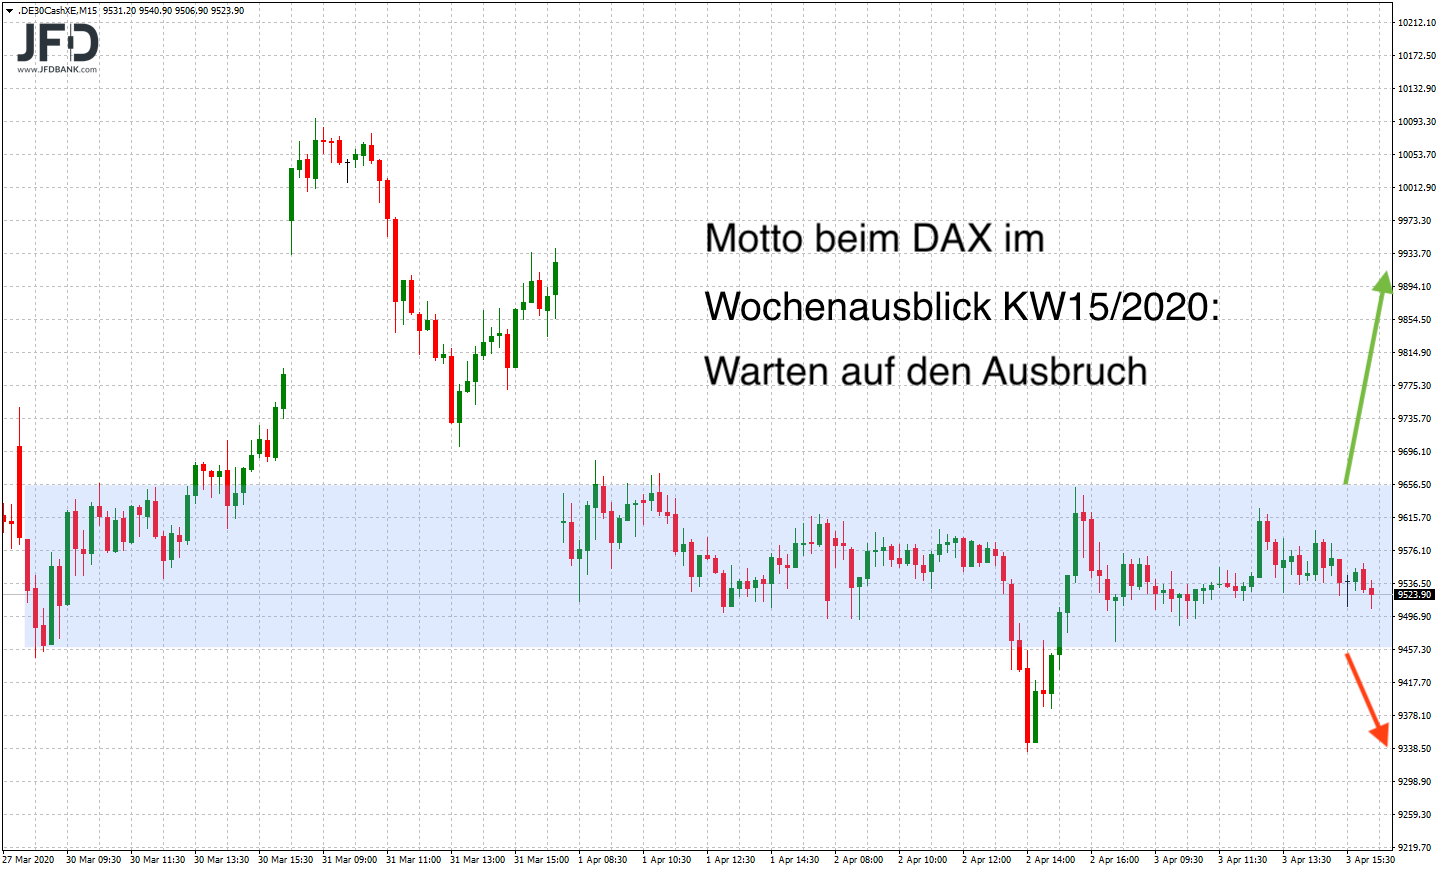 20200405_dax_teaser_kw15.png